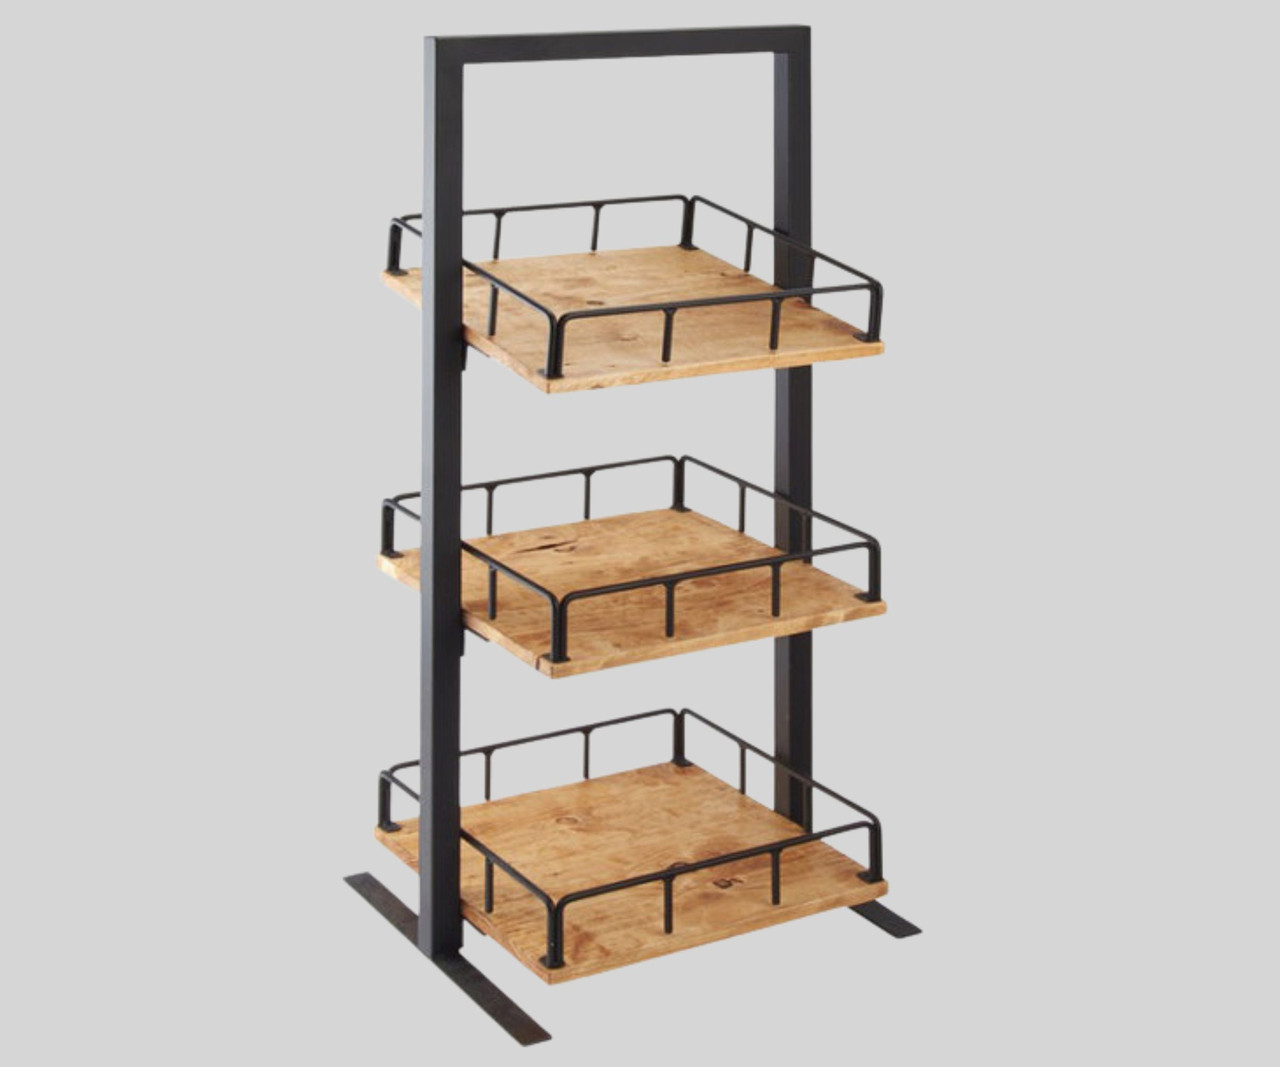 Cal-Mil Madera Three Tier Merchandiser - 12" x 12" x 31" - Rustic Wood and Metal Display Stand